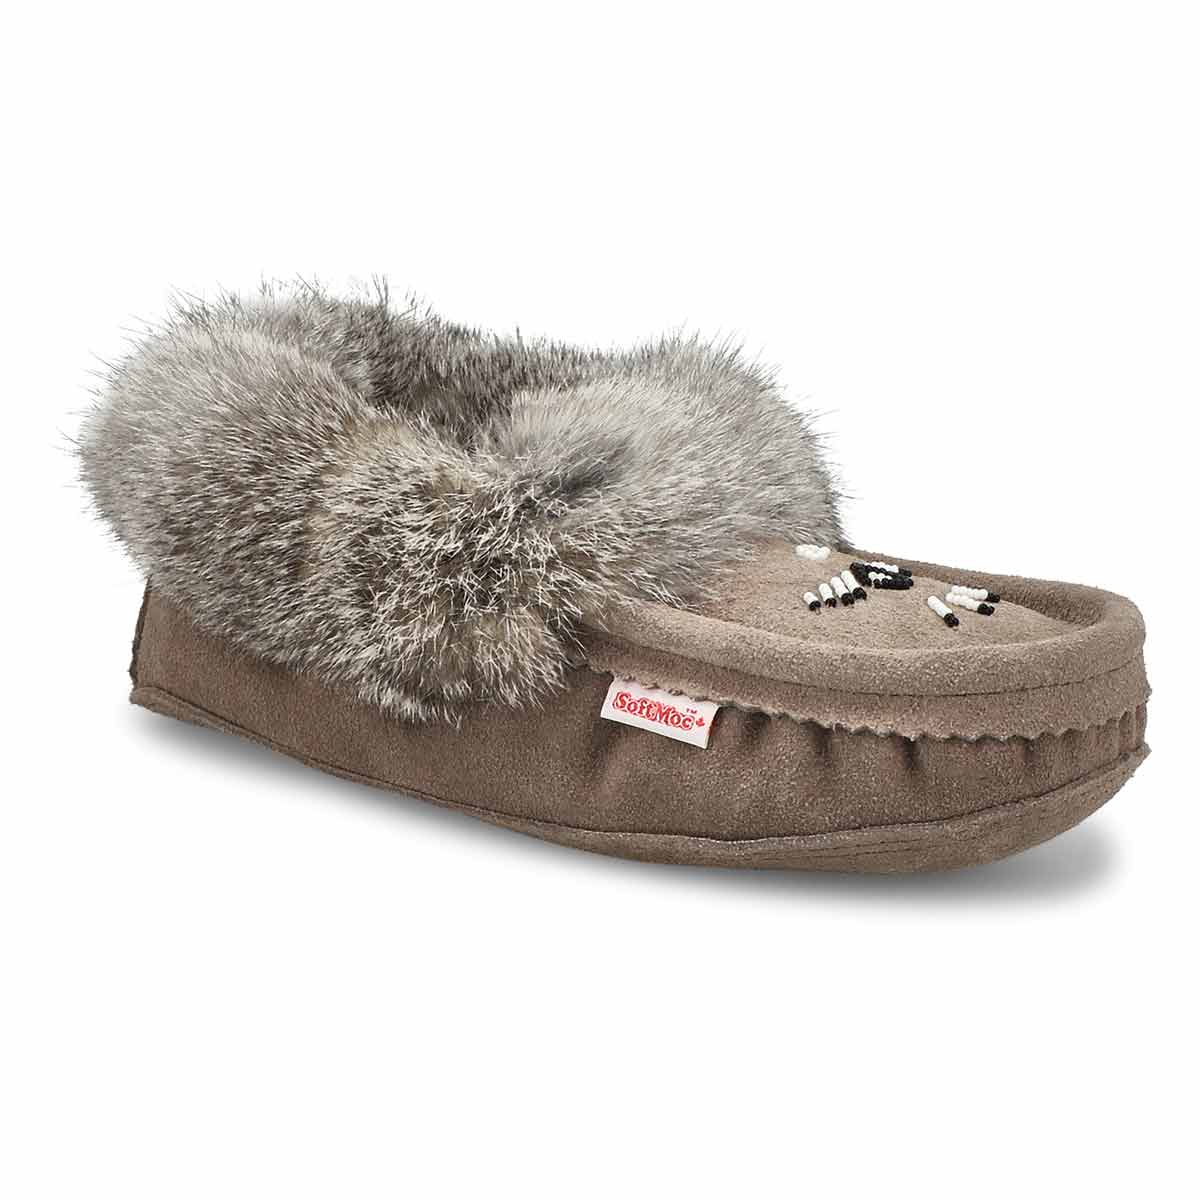 grey moccasin slippers